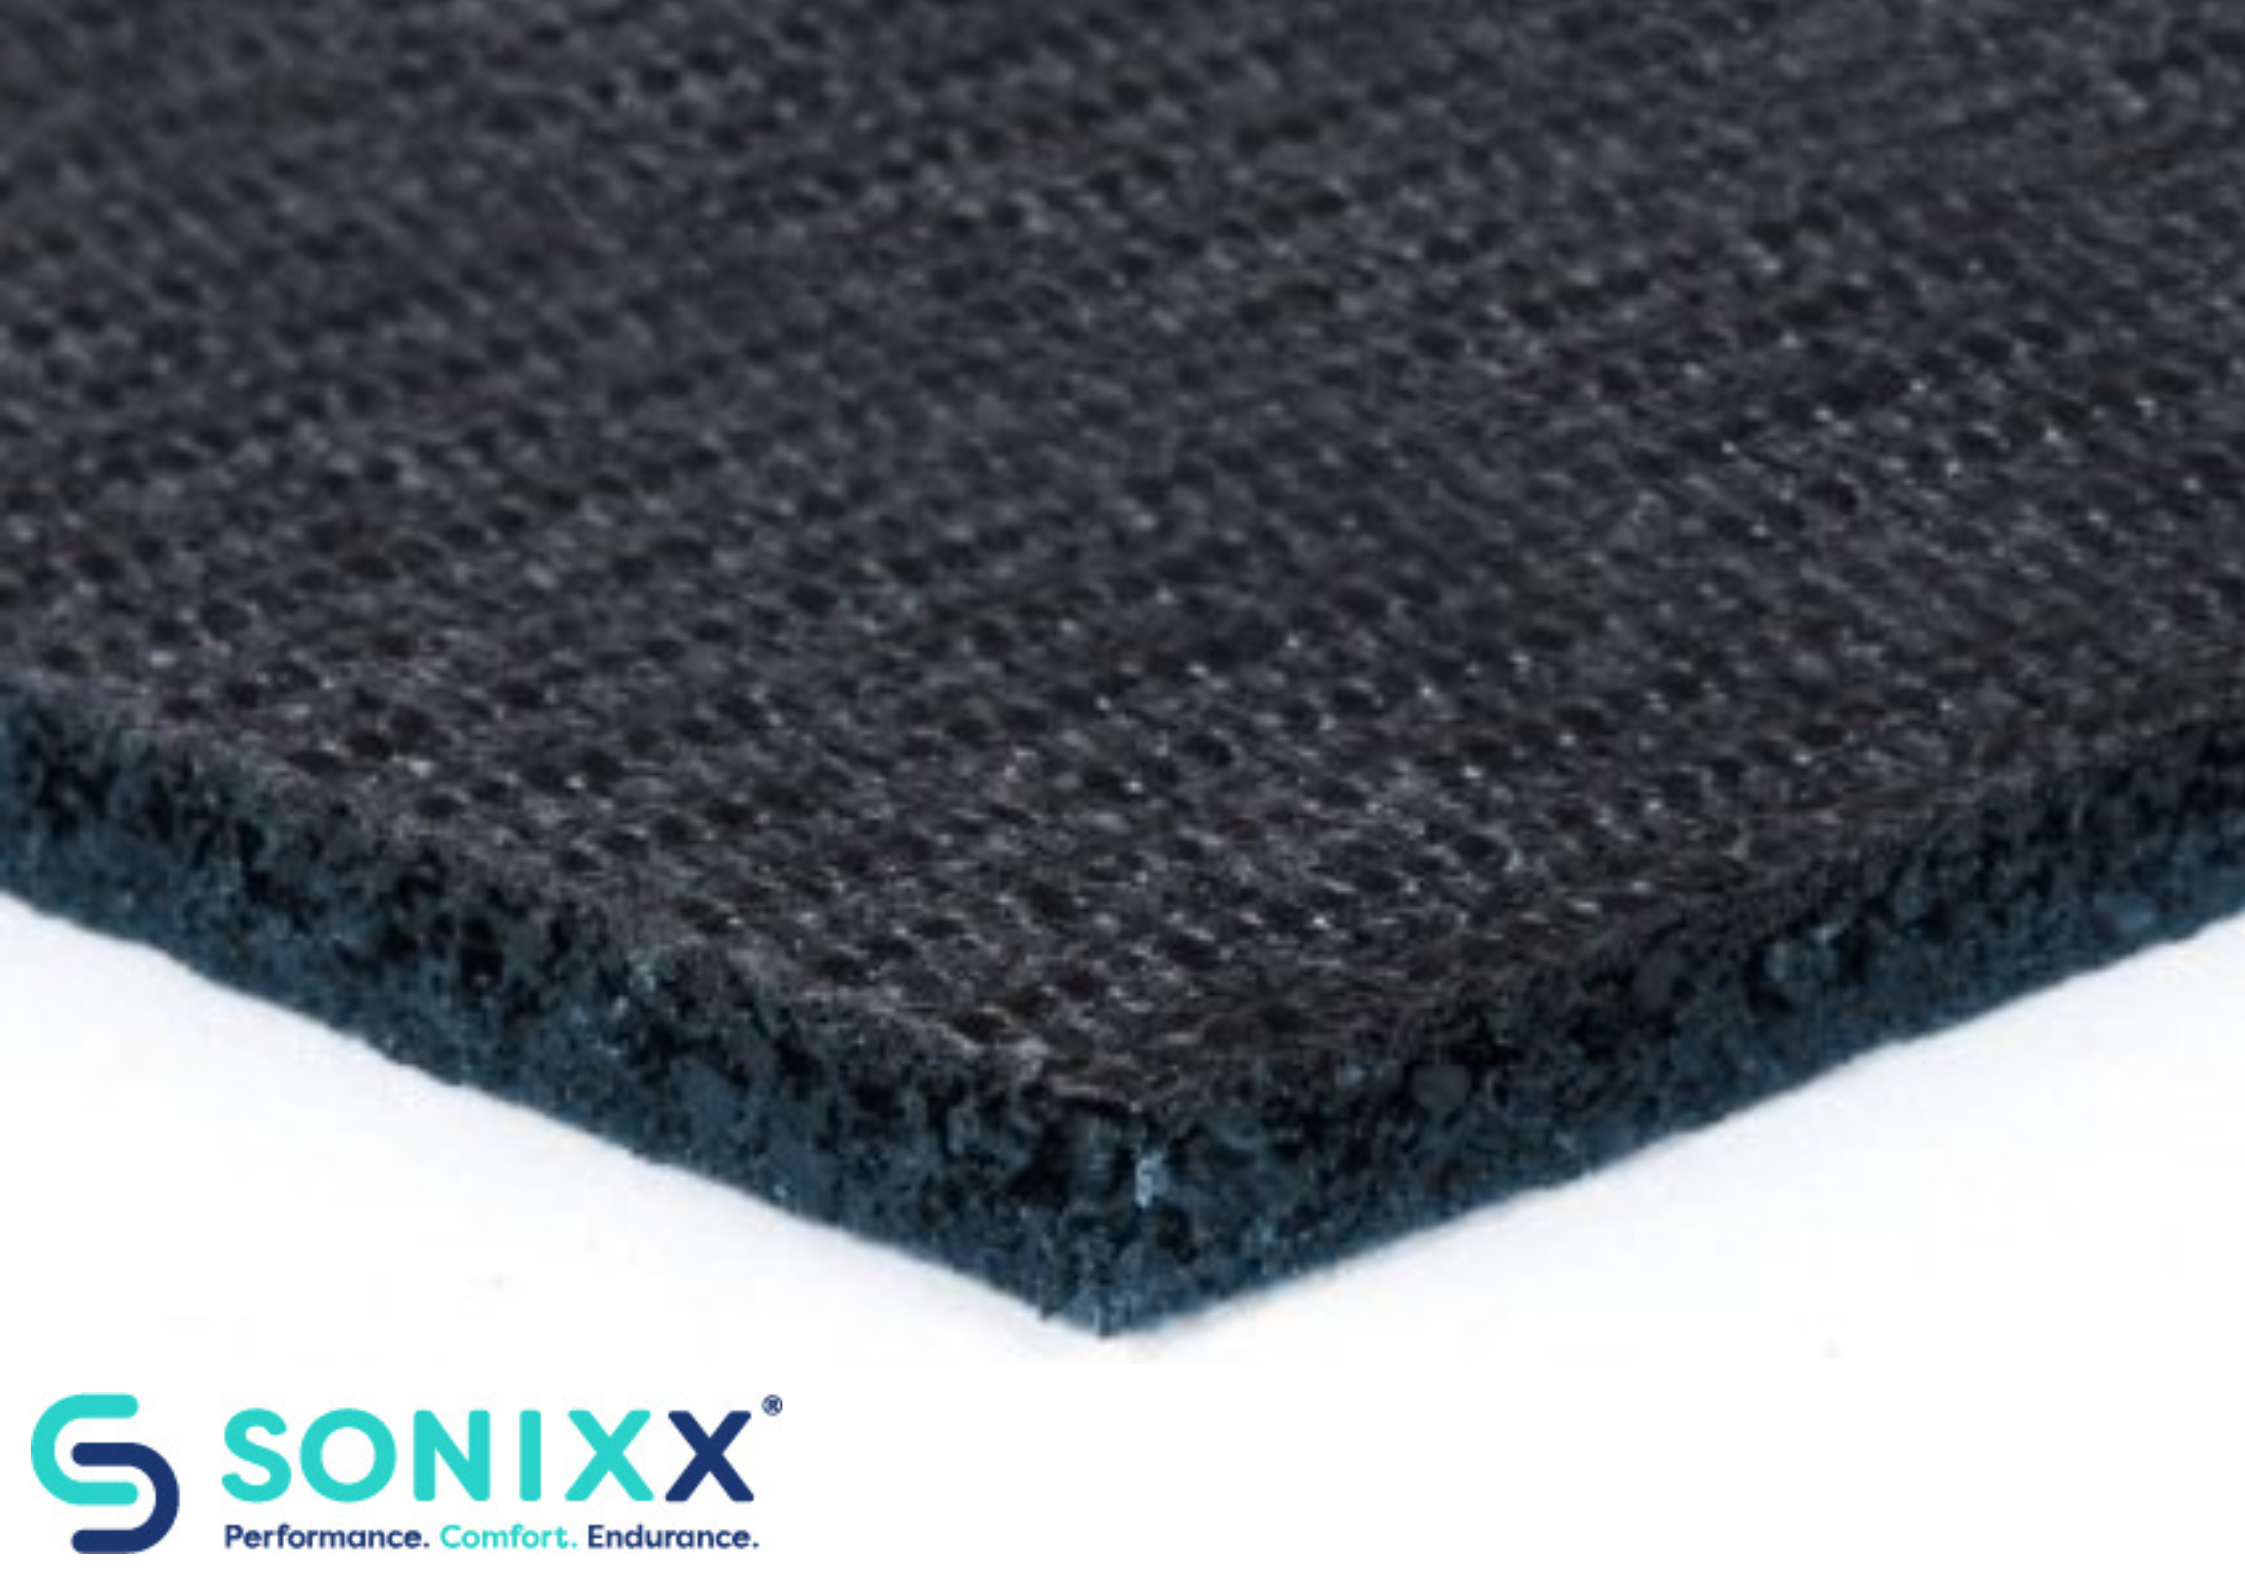 Sonixx Sonixx Soundsure SS560 5.6mm Underscreed Resilient layer / Acoustic Underlay (10sqm roll)